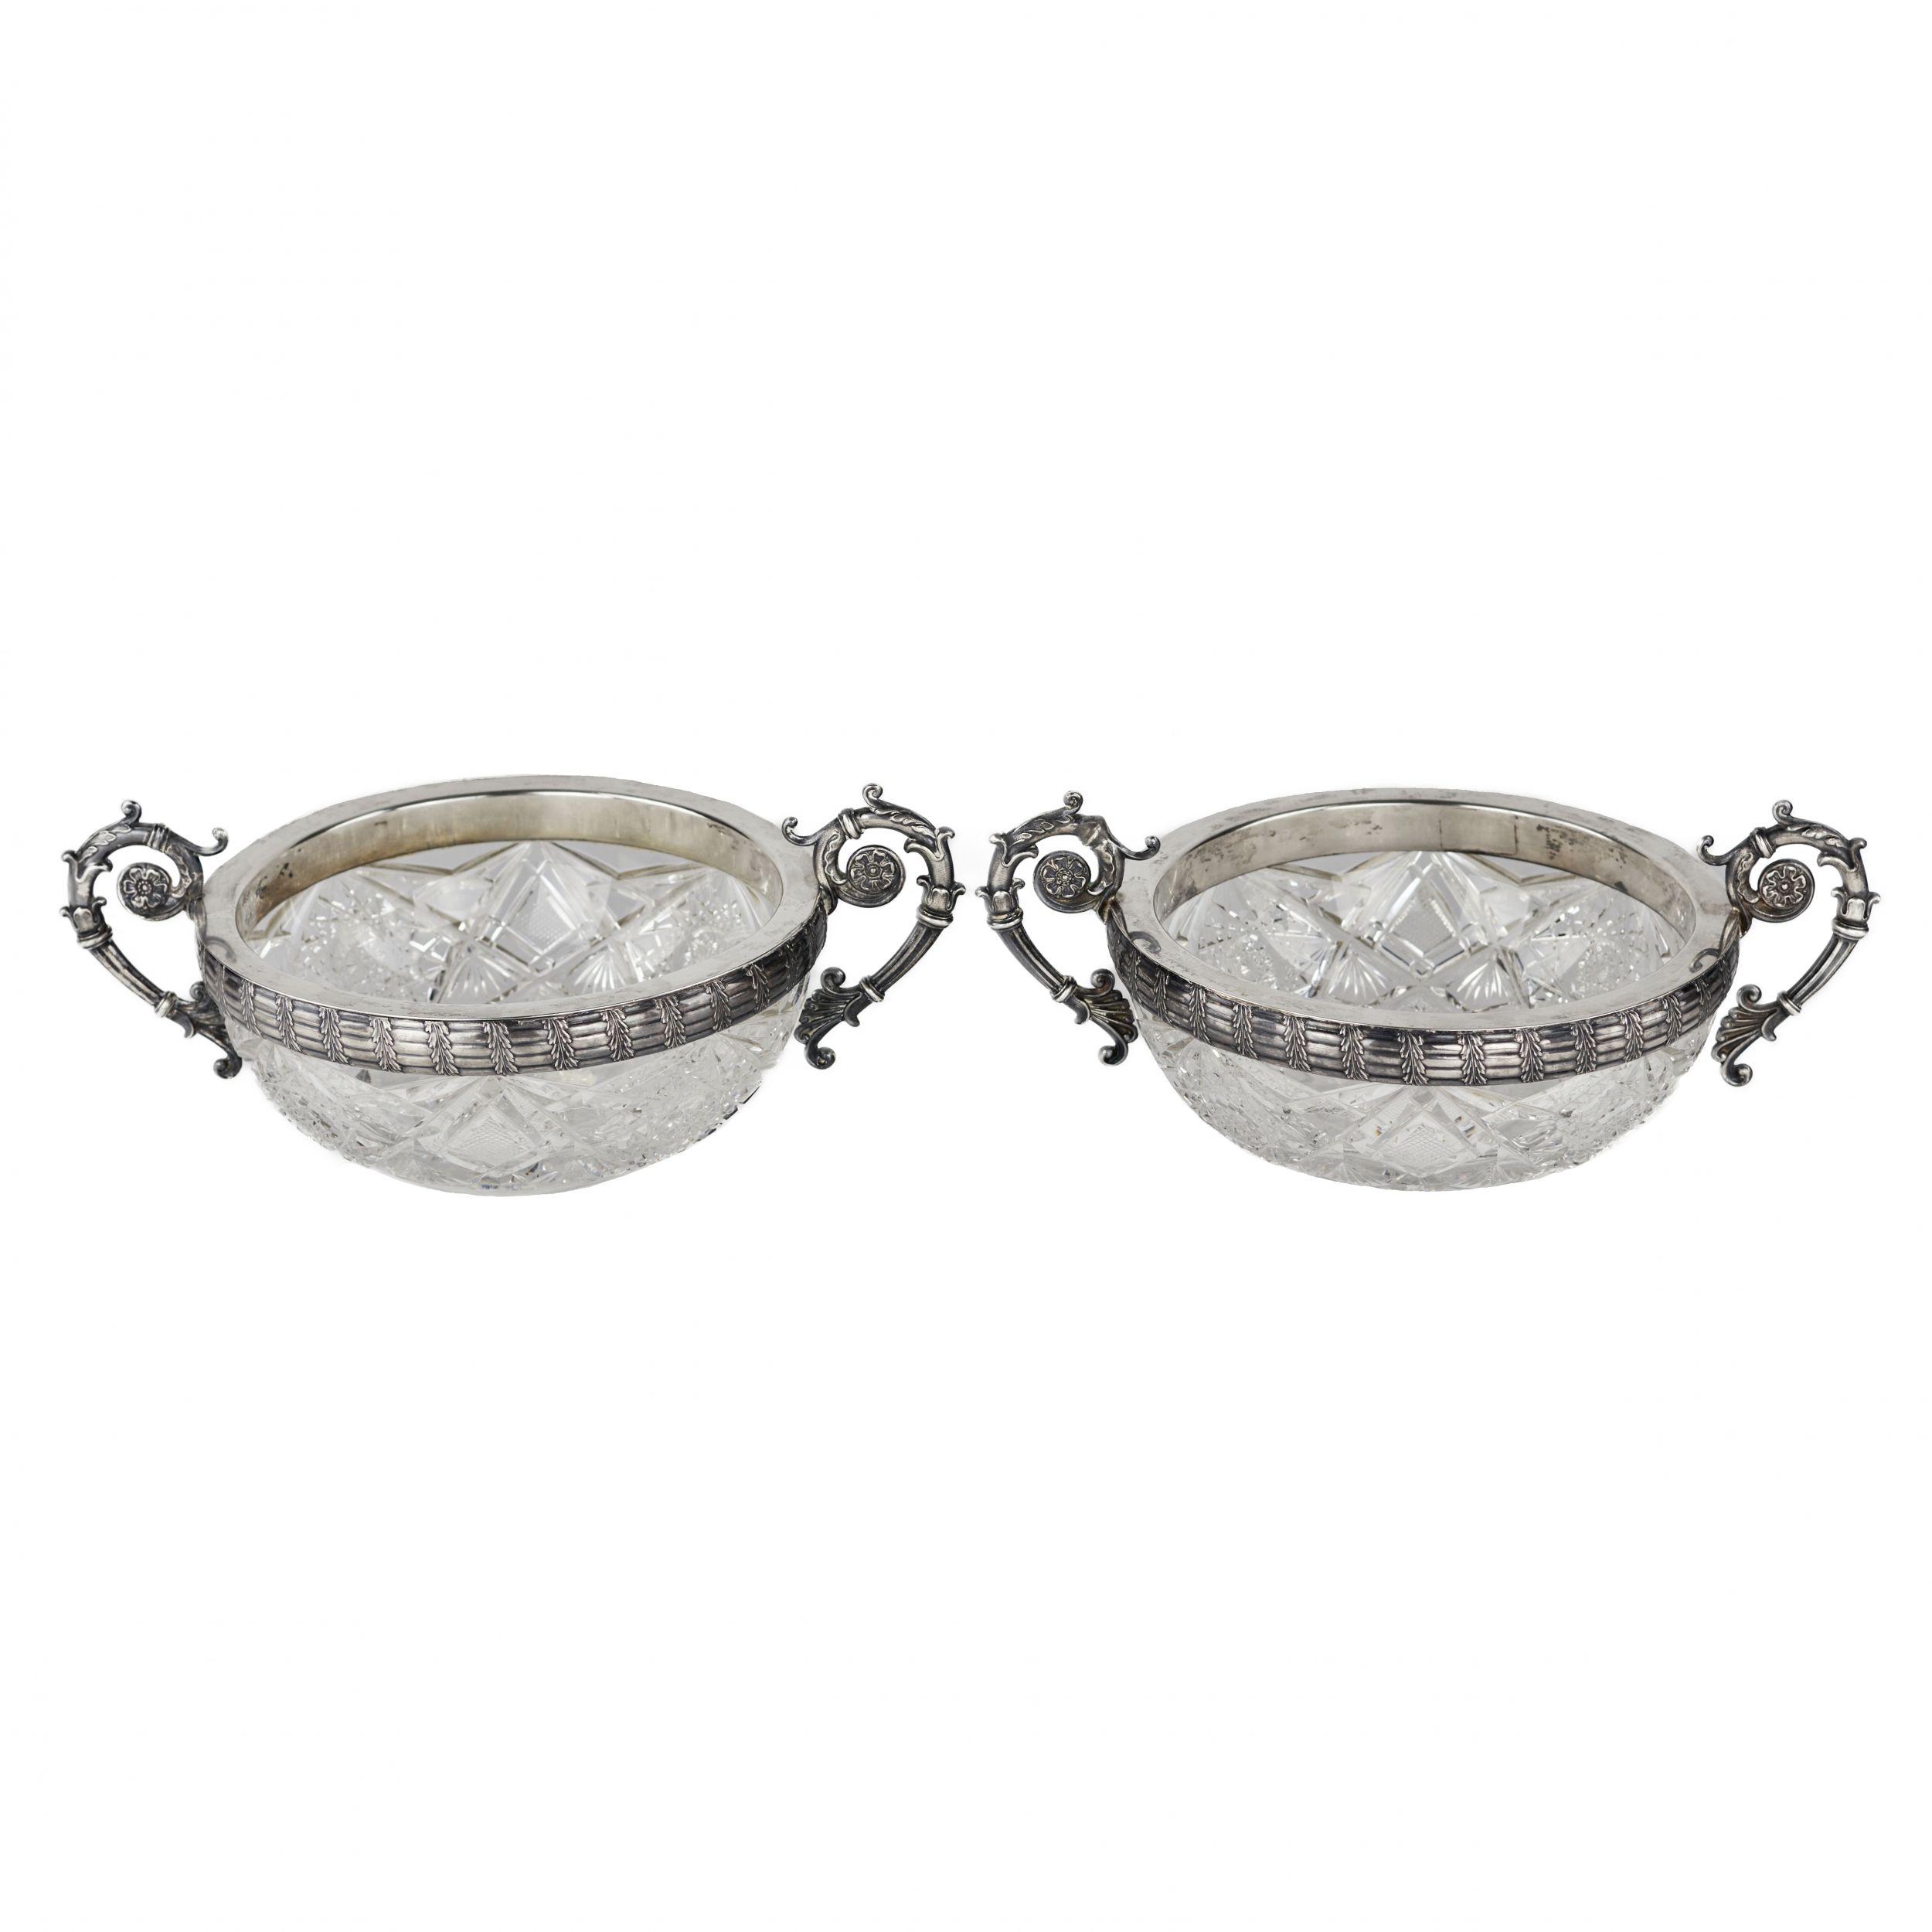 Pair of crystal candy bowls with silver. 15 Artel. Russia. 1908-1917 - Image 2 of 6